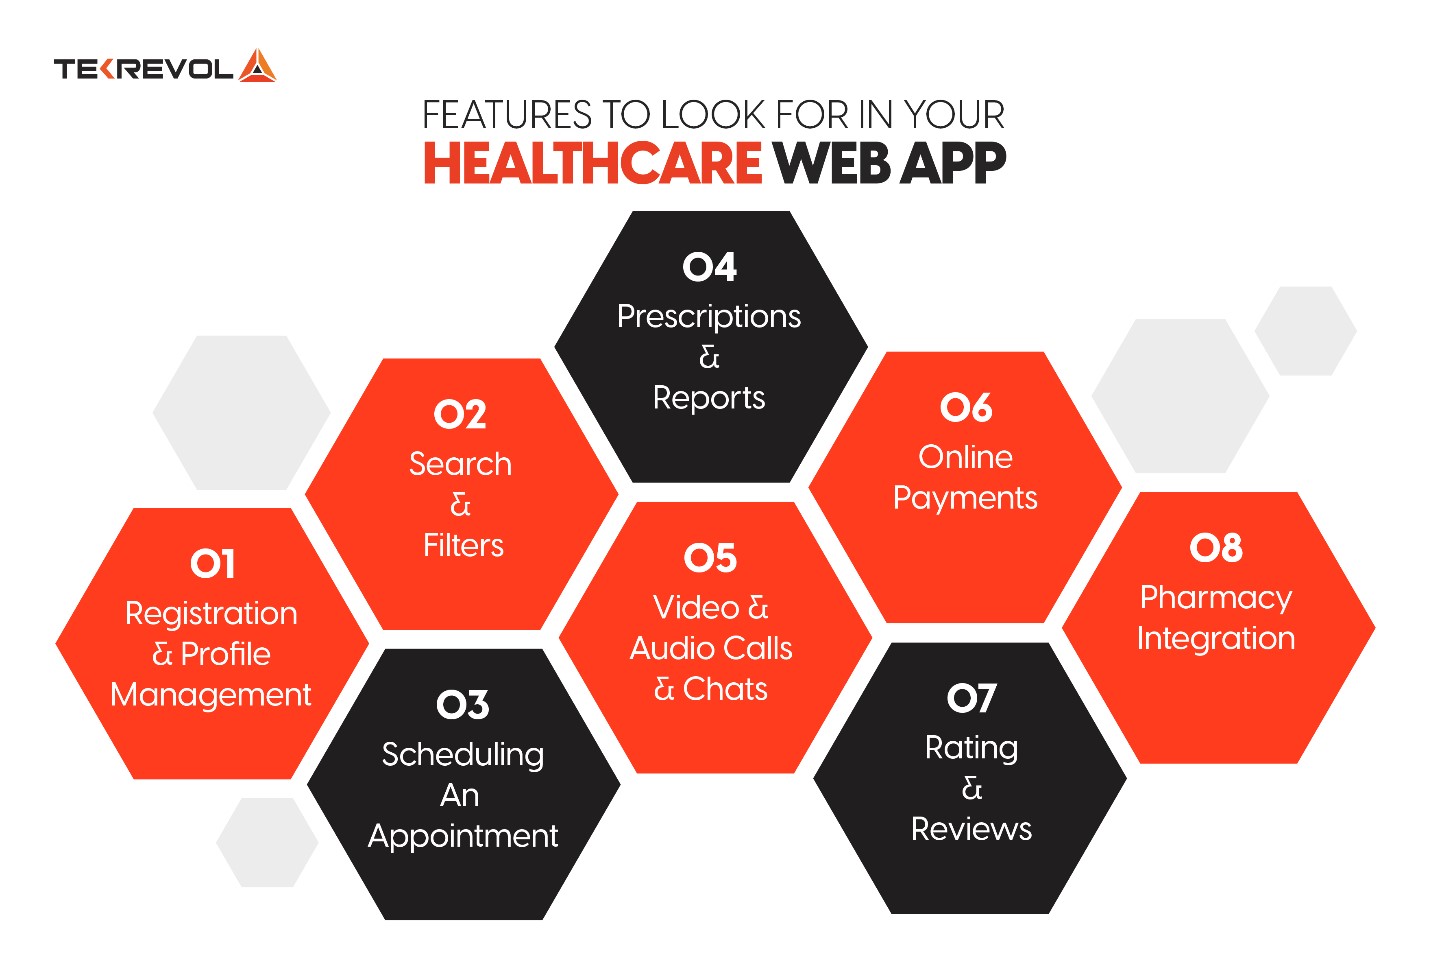 Must-Have Features in Healthcare Web Apps 